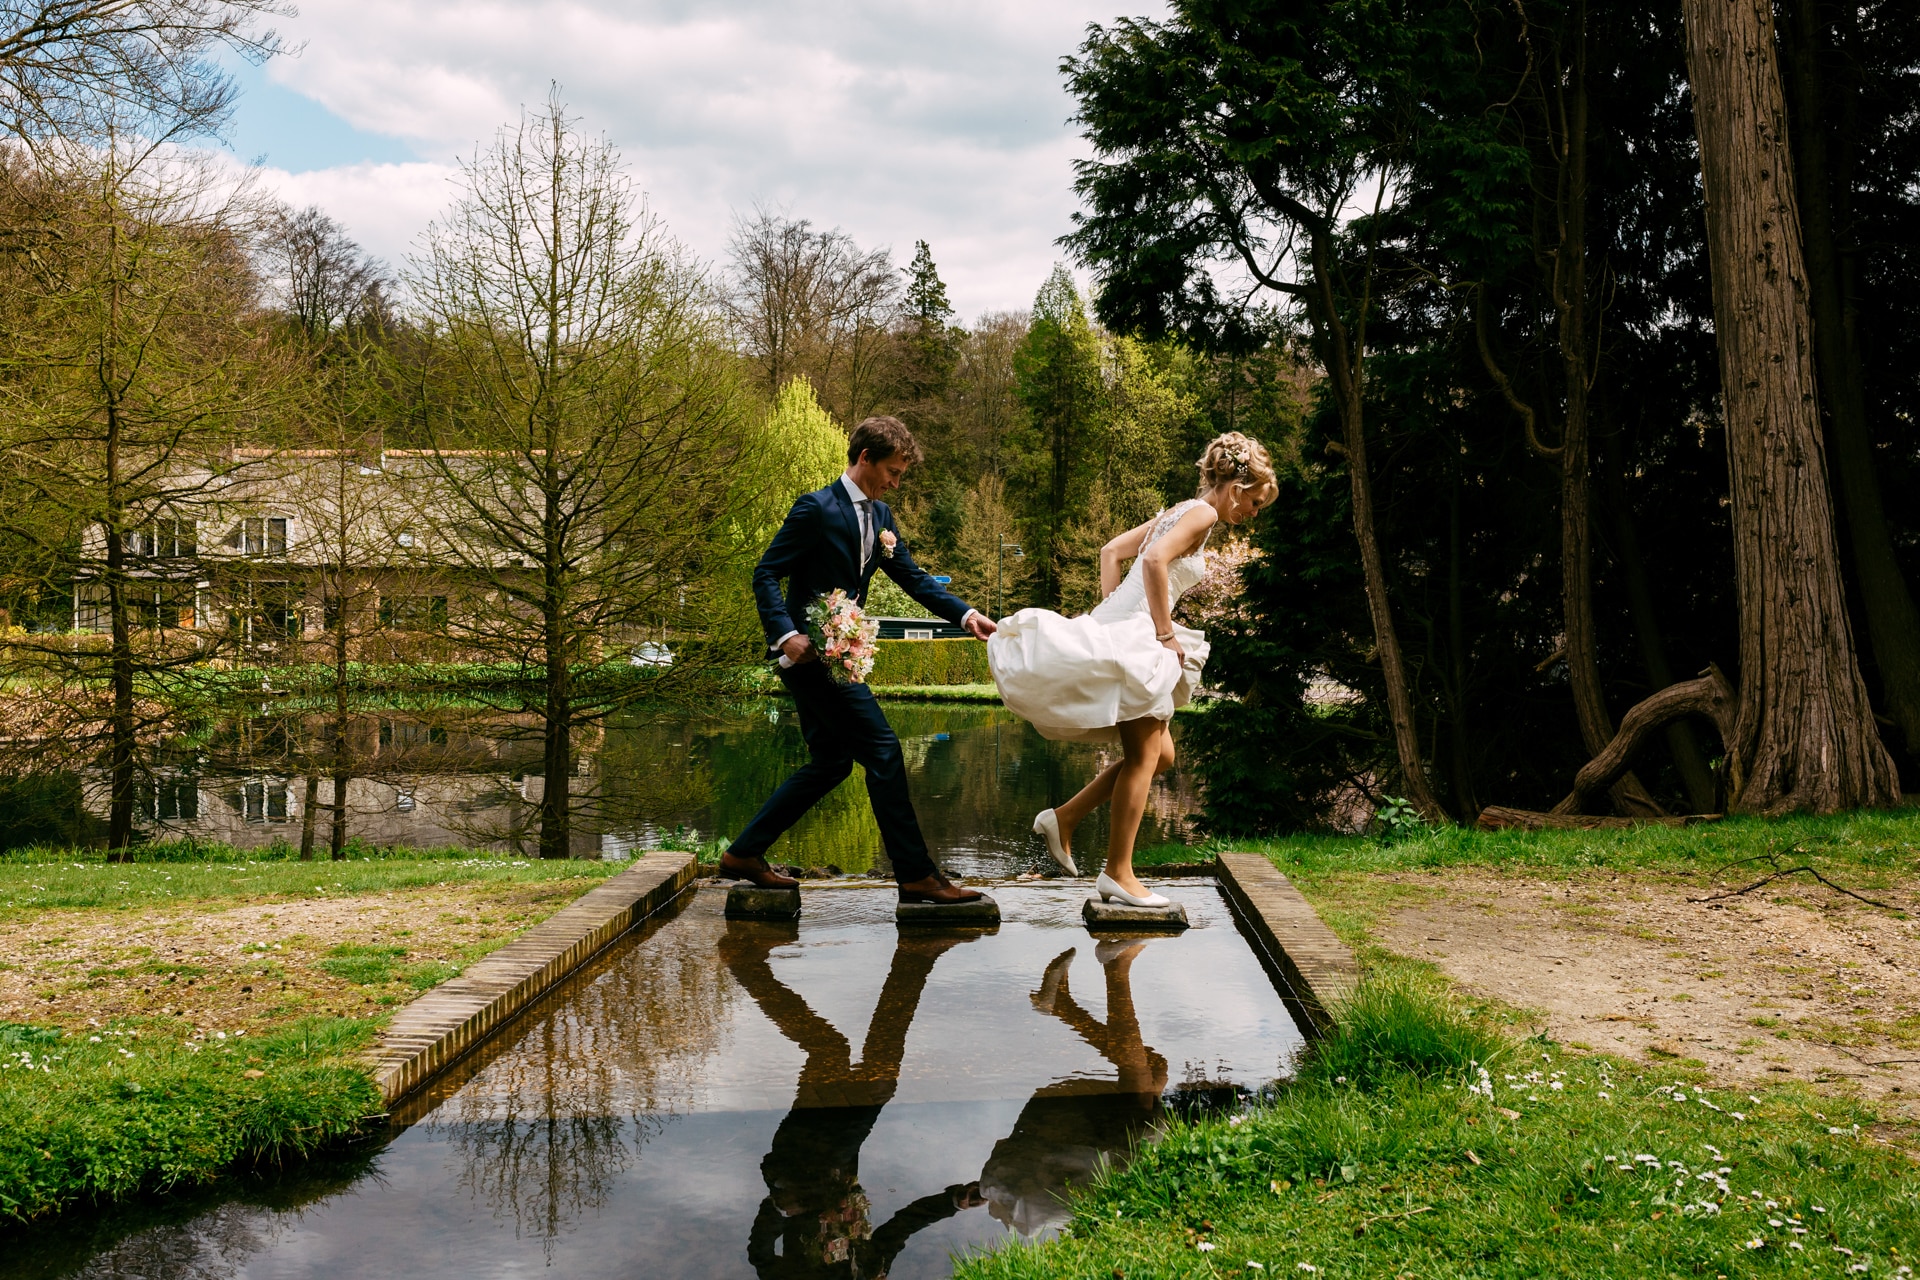 Getting married in a pond.